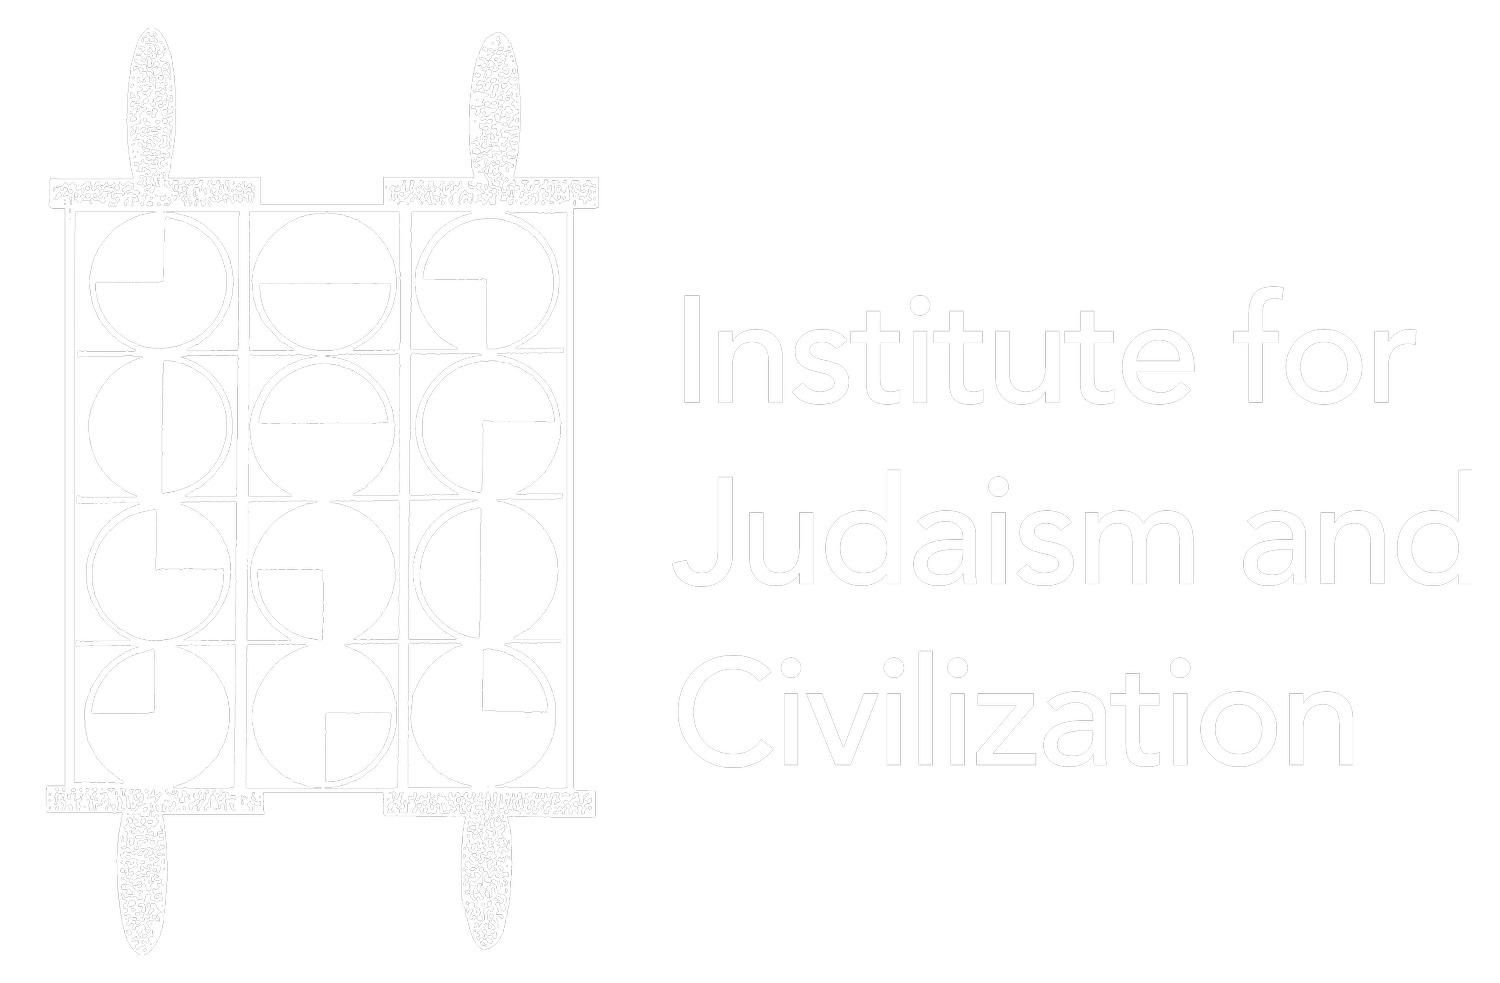 The Institute for Judaism and Civilization Inc